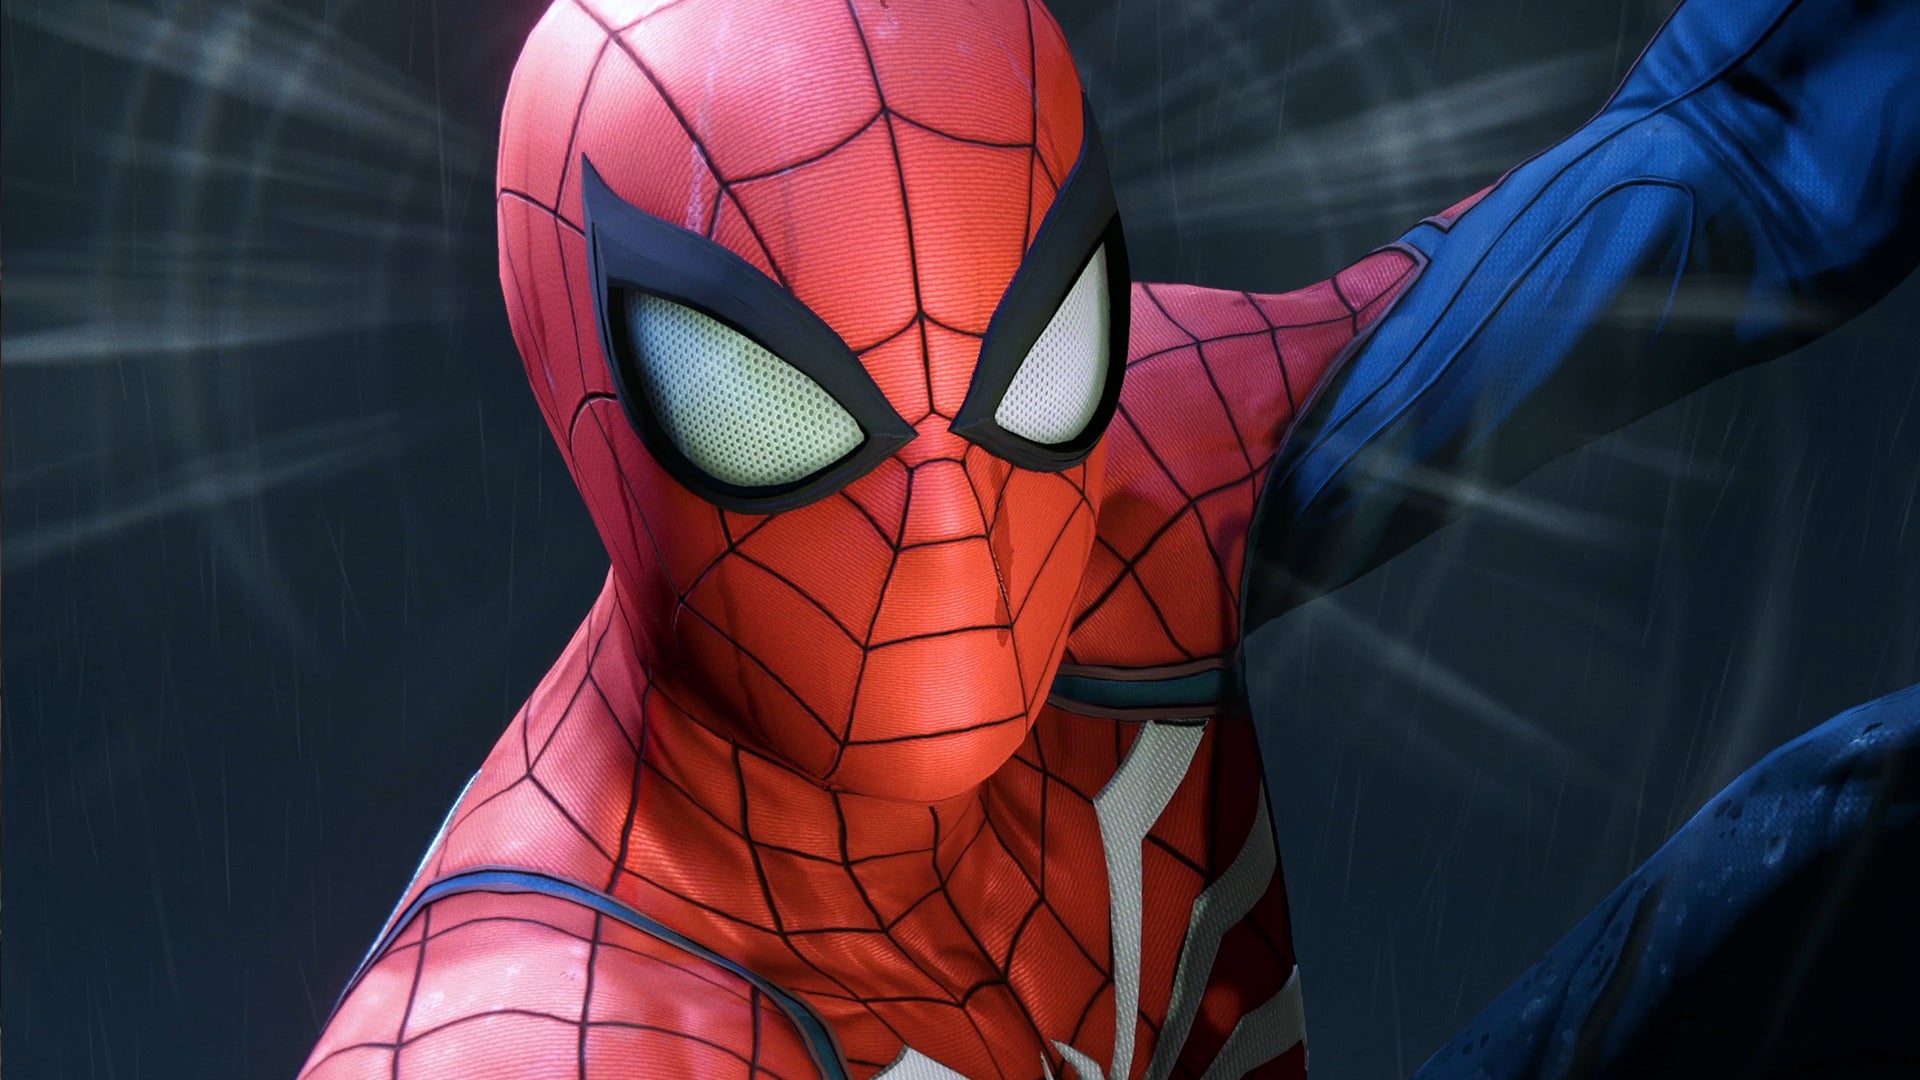 Image for Spider-Man PS4 Pro Early Analysis - Insomniac's New Tech Showcase